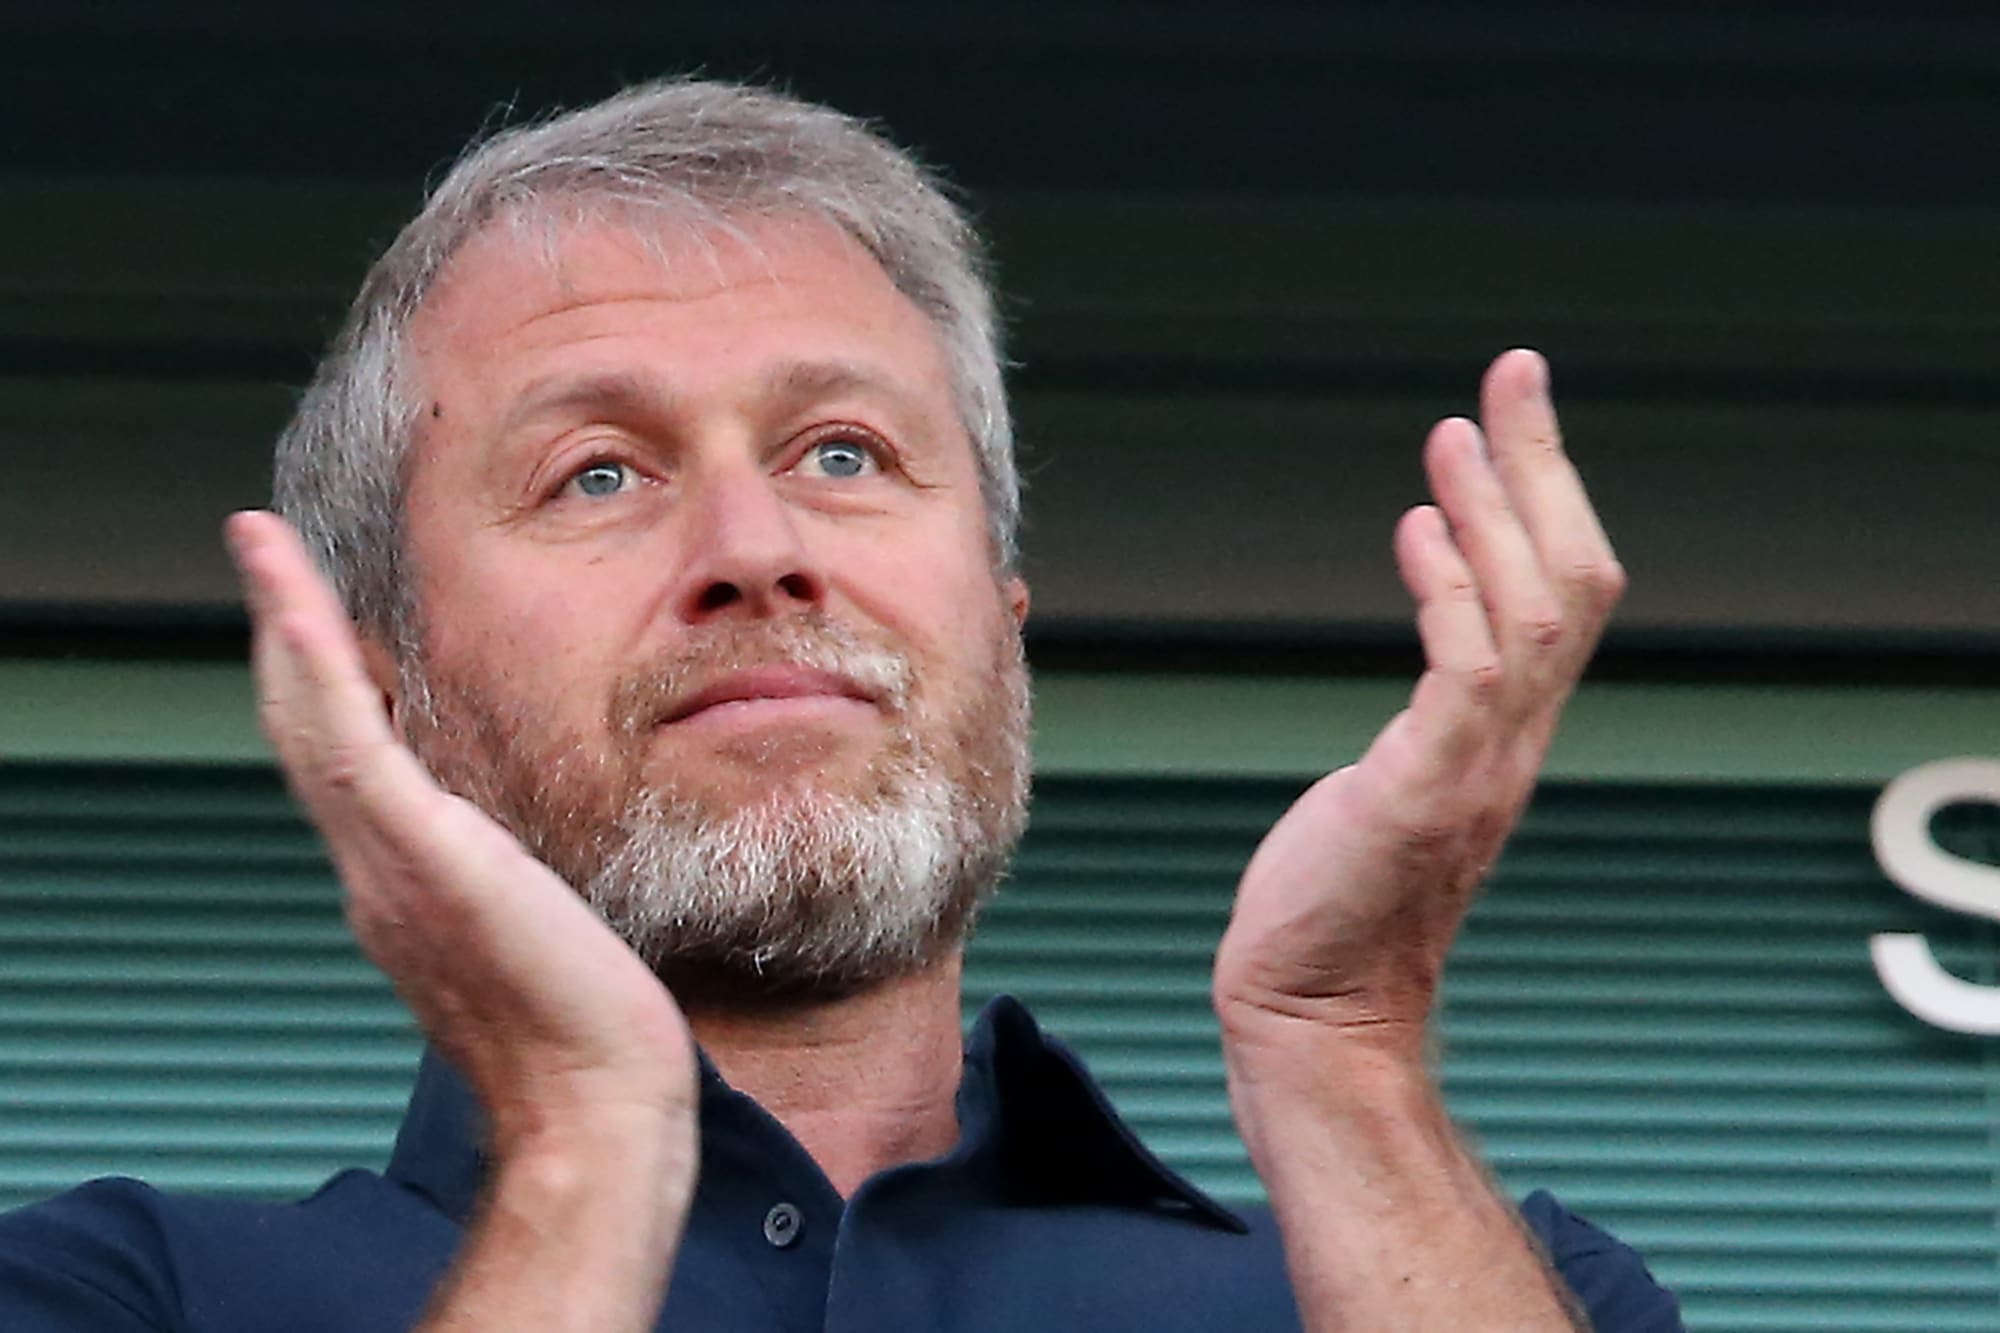 The Kremlin has said Mr Abramovich played an early role in peace talks between Russia and Ukraine but the process was now in the hands of the two sides' negotiating teams. 